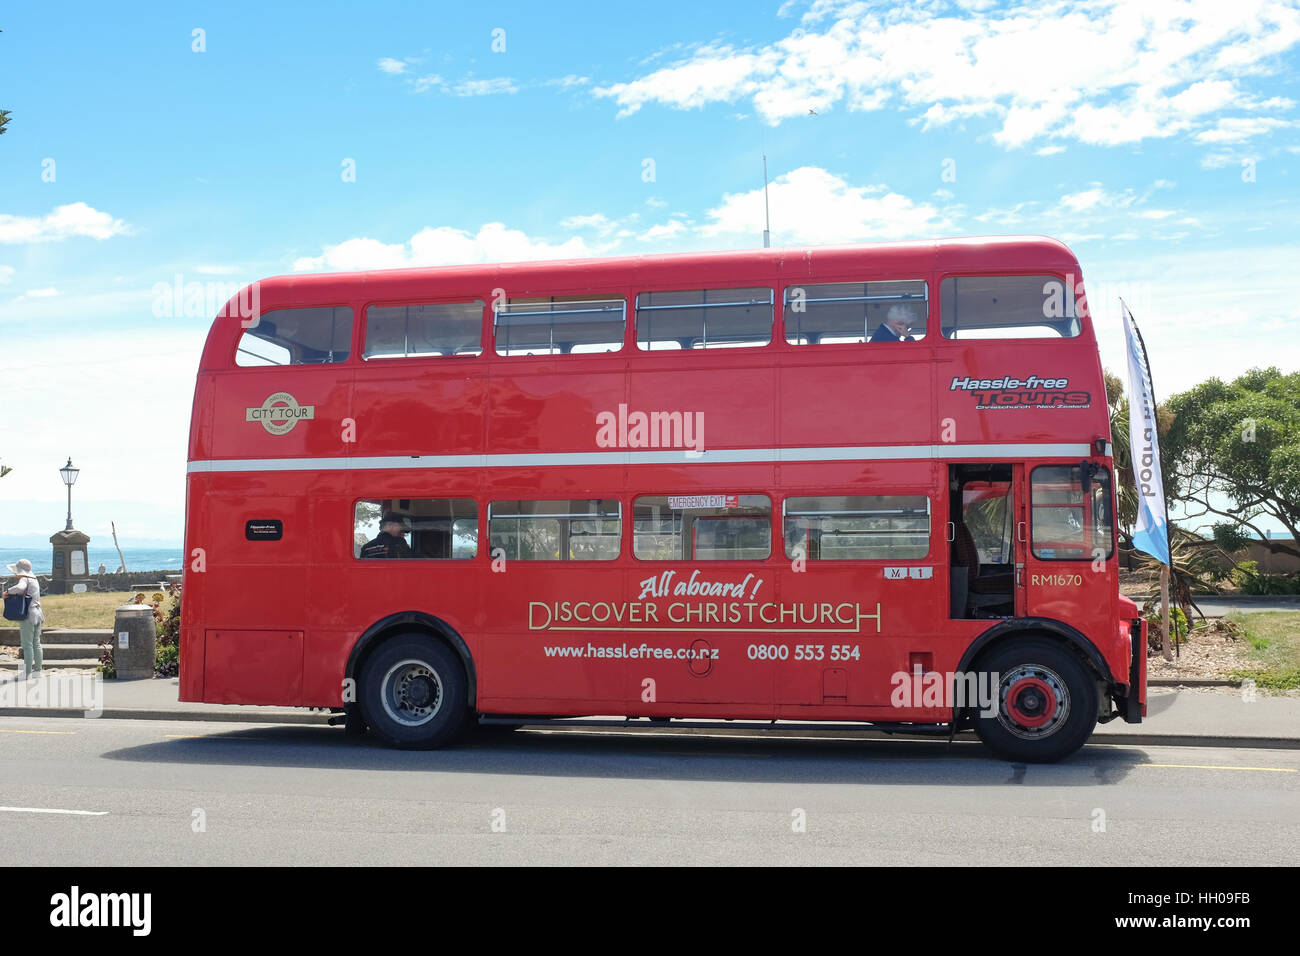 A London double-decker bus used for tourists trips in Christchurch, New Zealand. Stock Photo